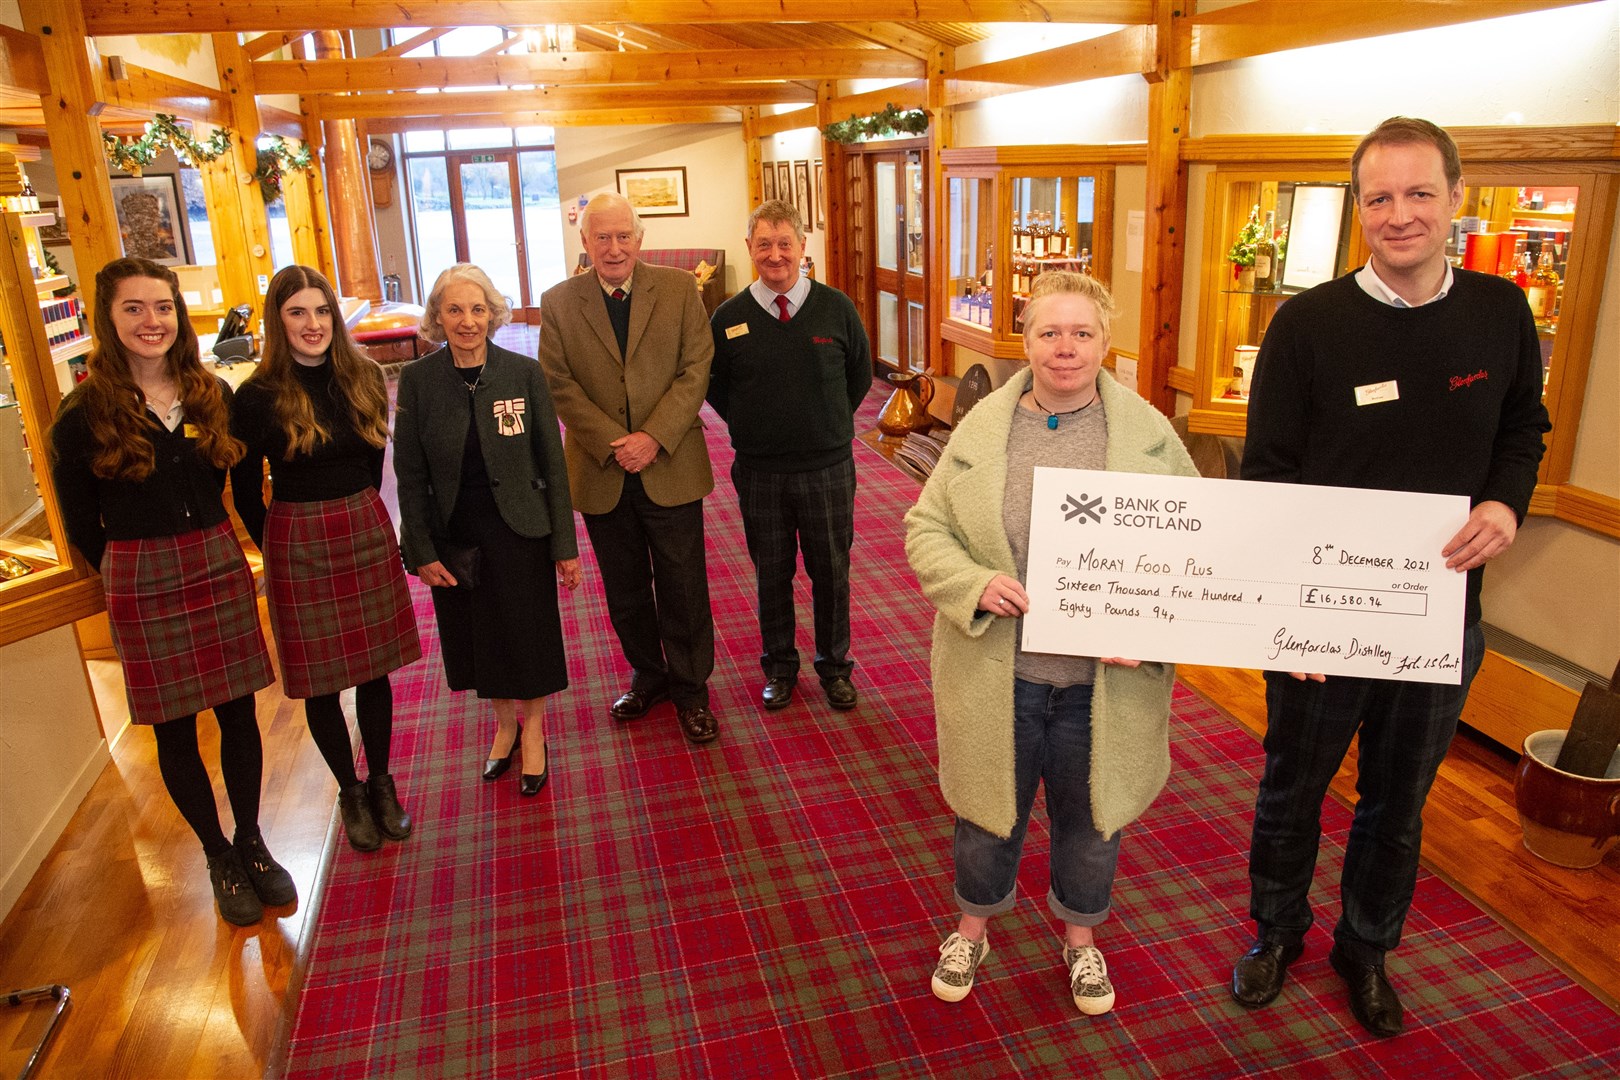 Mairi McCallum, Moray Food Plus project manager, is presented with a cheque by Glenfarclas visitor centre manager Matthew Porritt. They are joined by (from left) Lauren MacDonald, Kirstin MacDonald, Vice Lord-Lieutenant of Banffshire Patricia Seligman, Lord-Lieutenant of Moray Seymour Monro and Steve Allan. Picture: Daniel Forsyth.